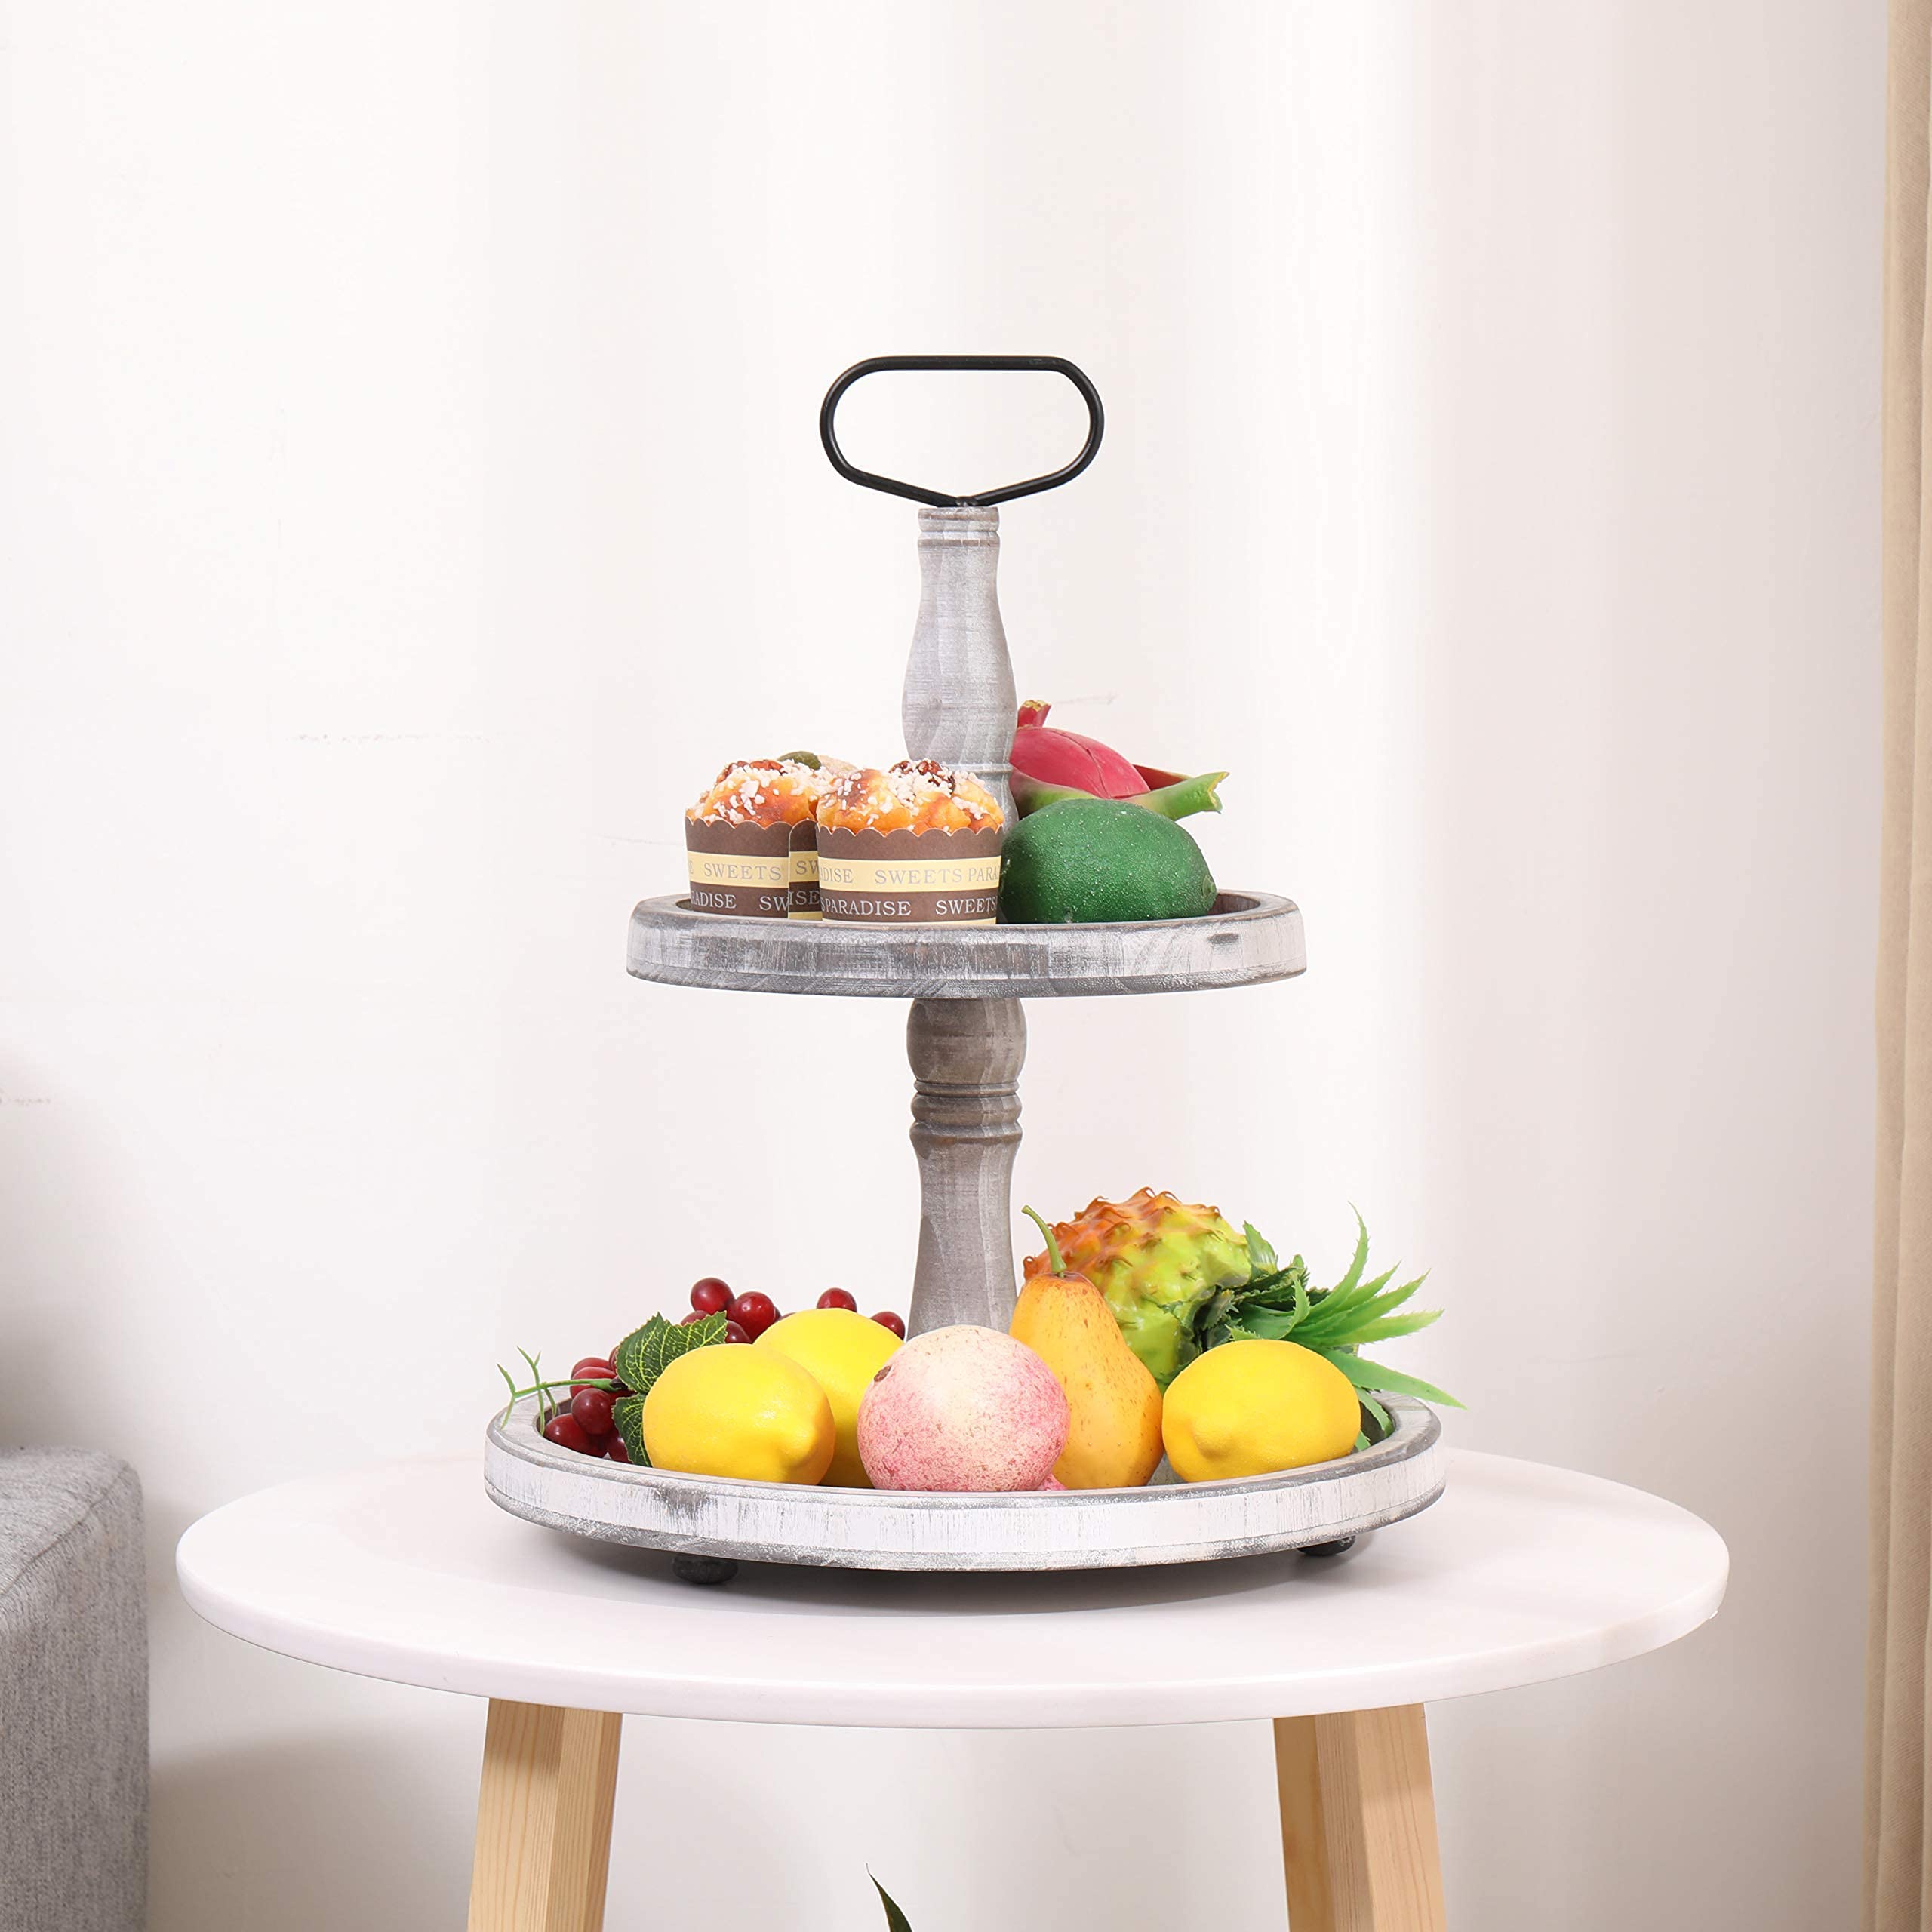 Vintage Wood Two Tiered Tray with Round Metal Handle，Easy to Assemble 2 Tier Home Decor for Tiered Food Presentation Serving Tray，Cupcake Tray (White)